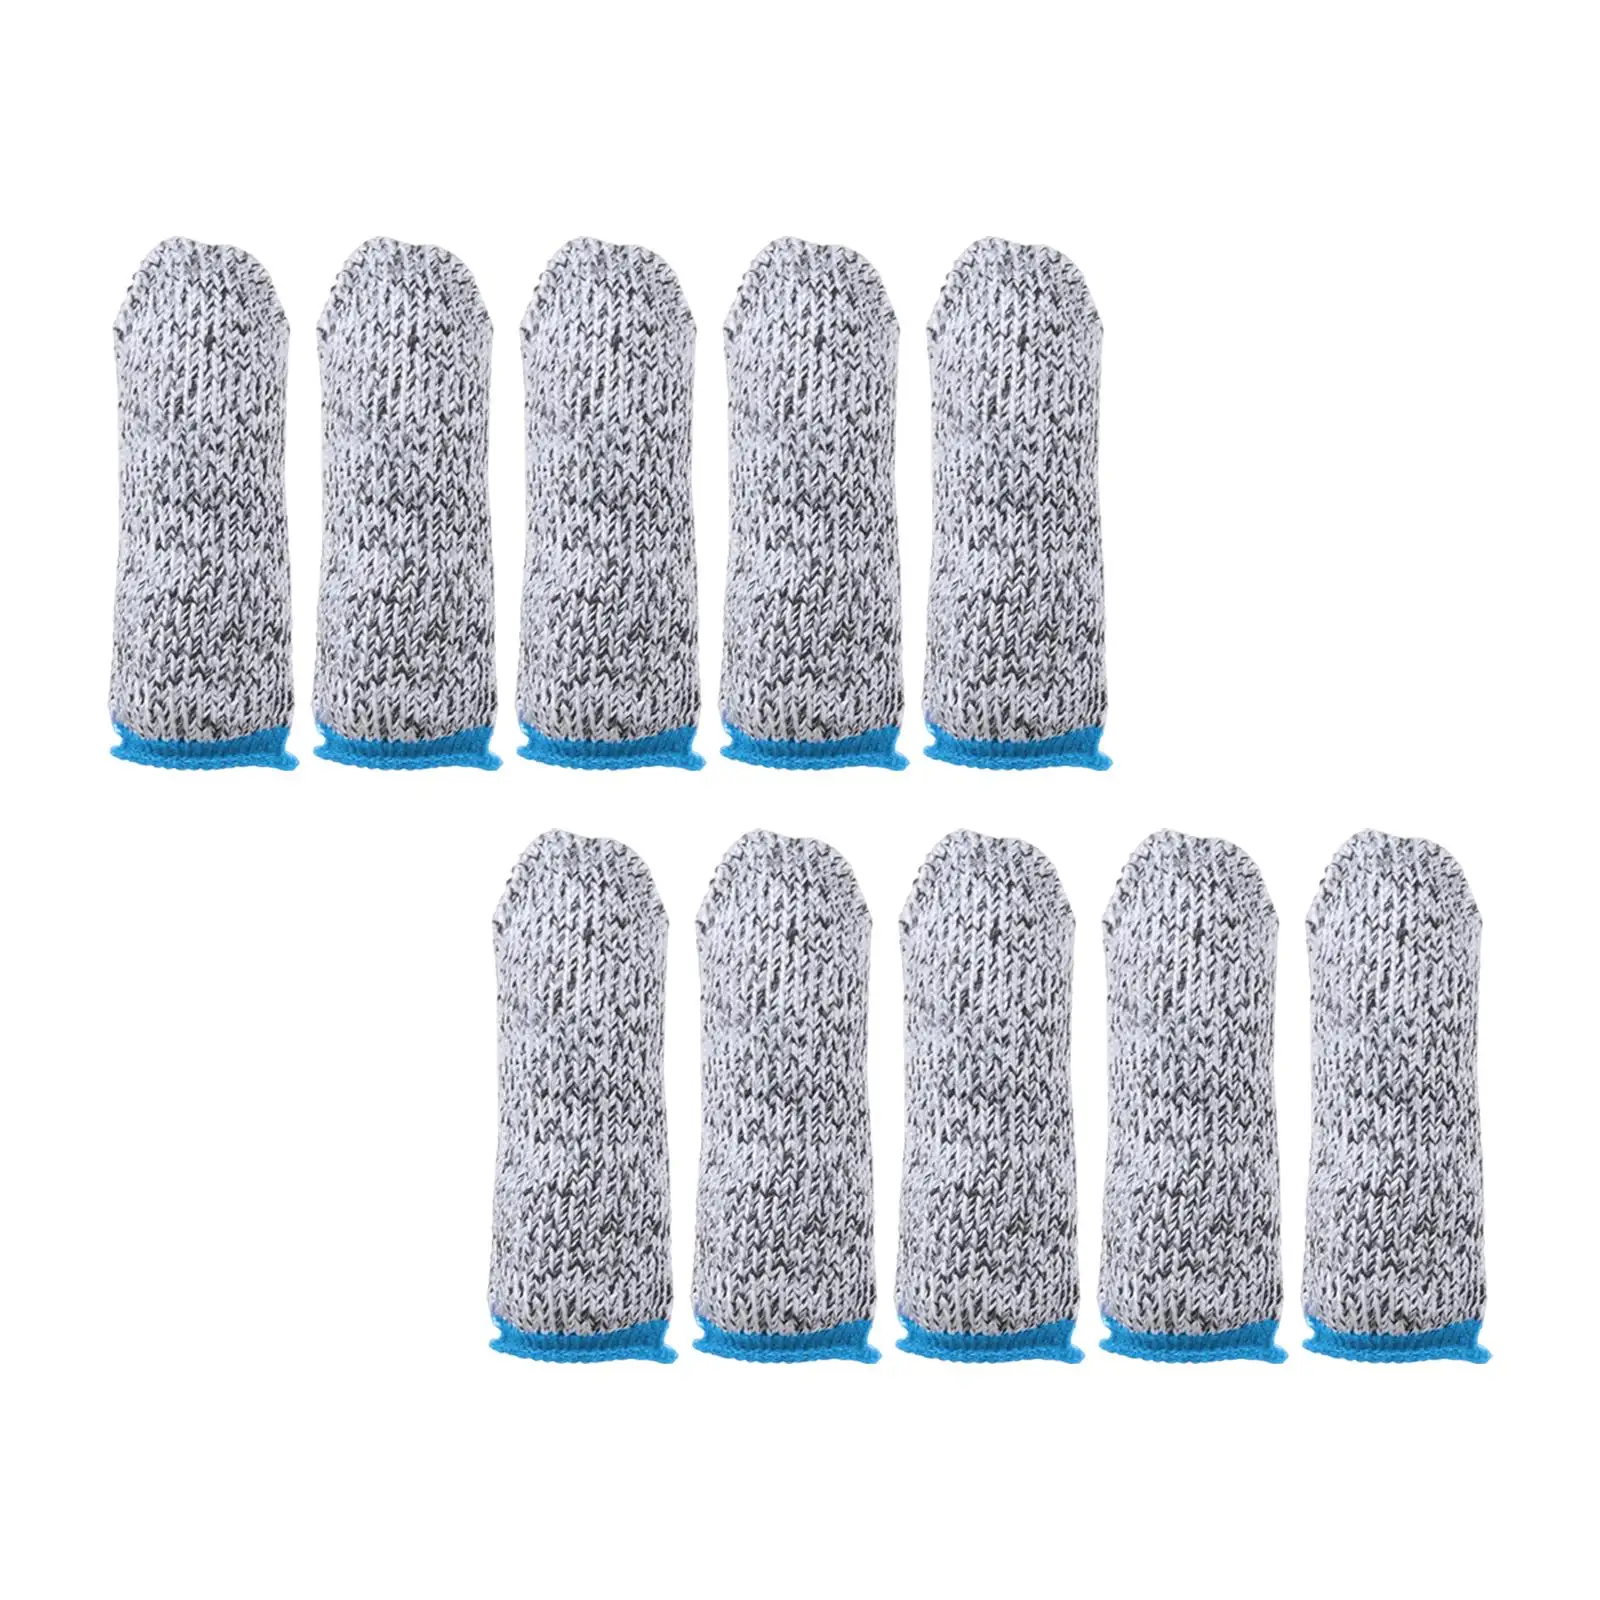 10Pcs Finger Thumb Cots Anti Slip Comfortable Thumb Protector Protection Reusable Fingertip Cover Breathable Gloves for Crafting